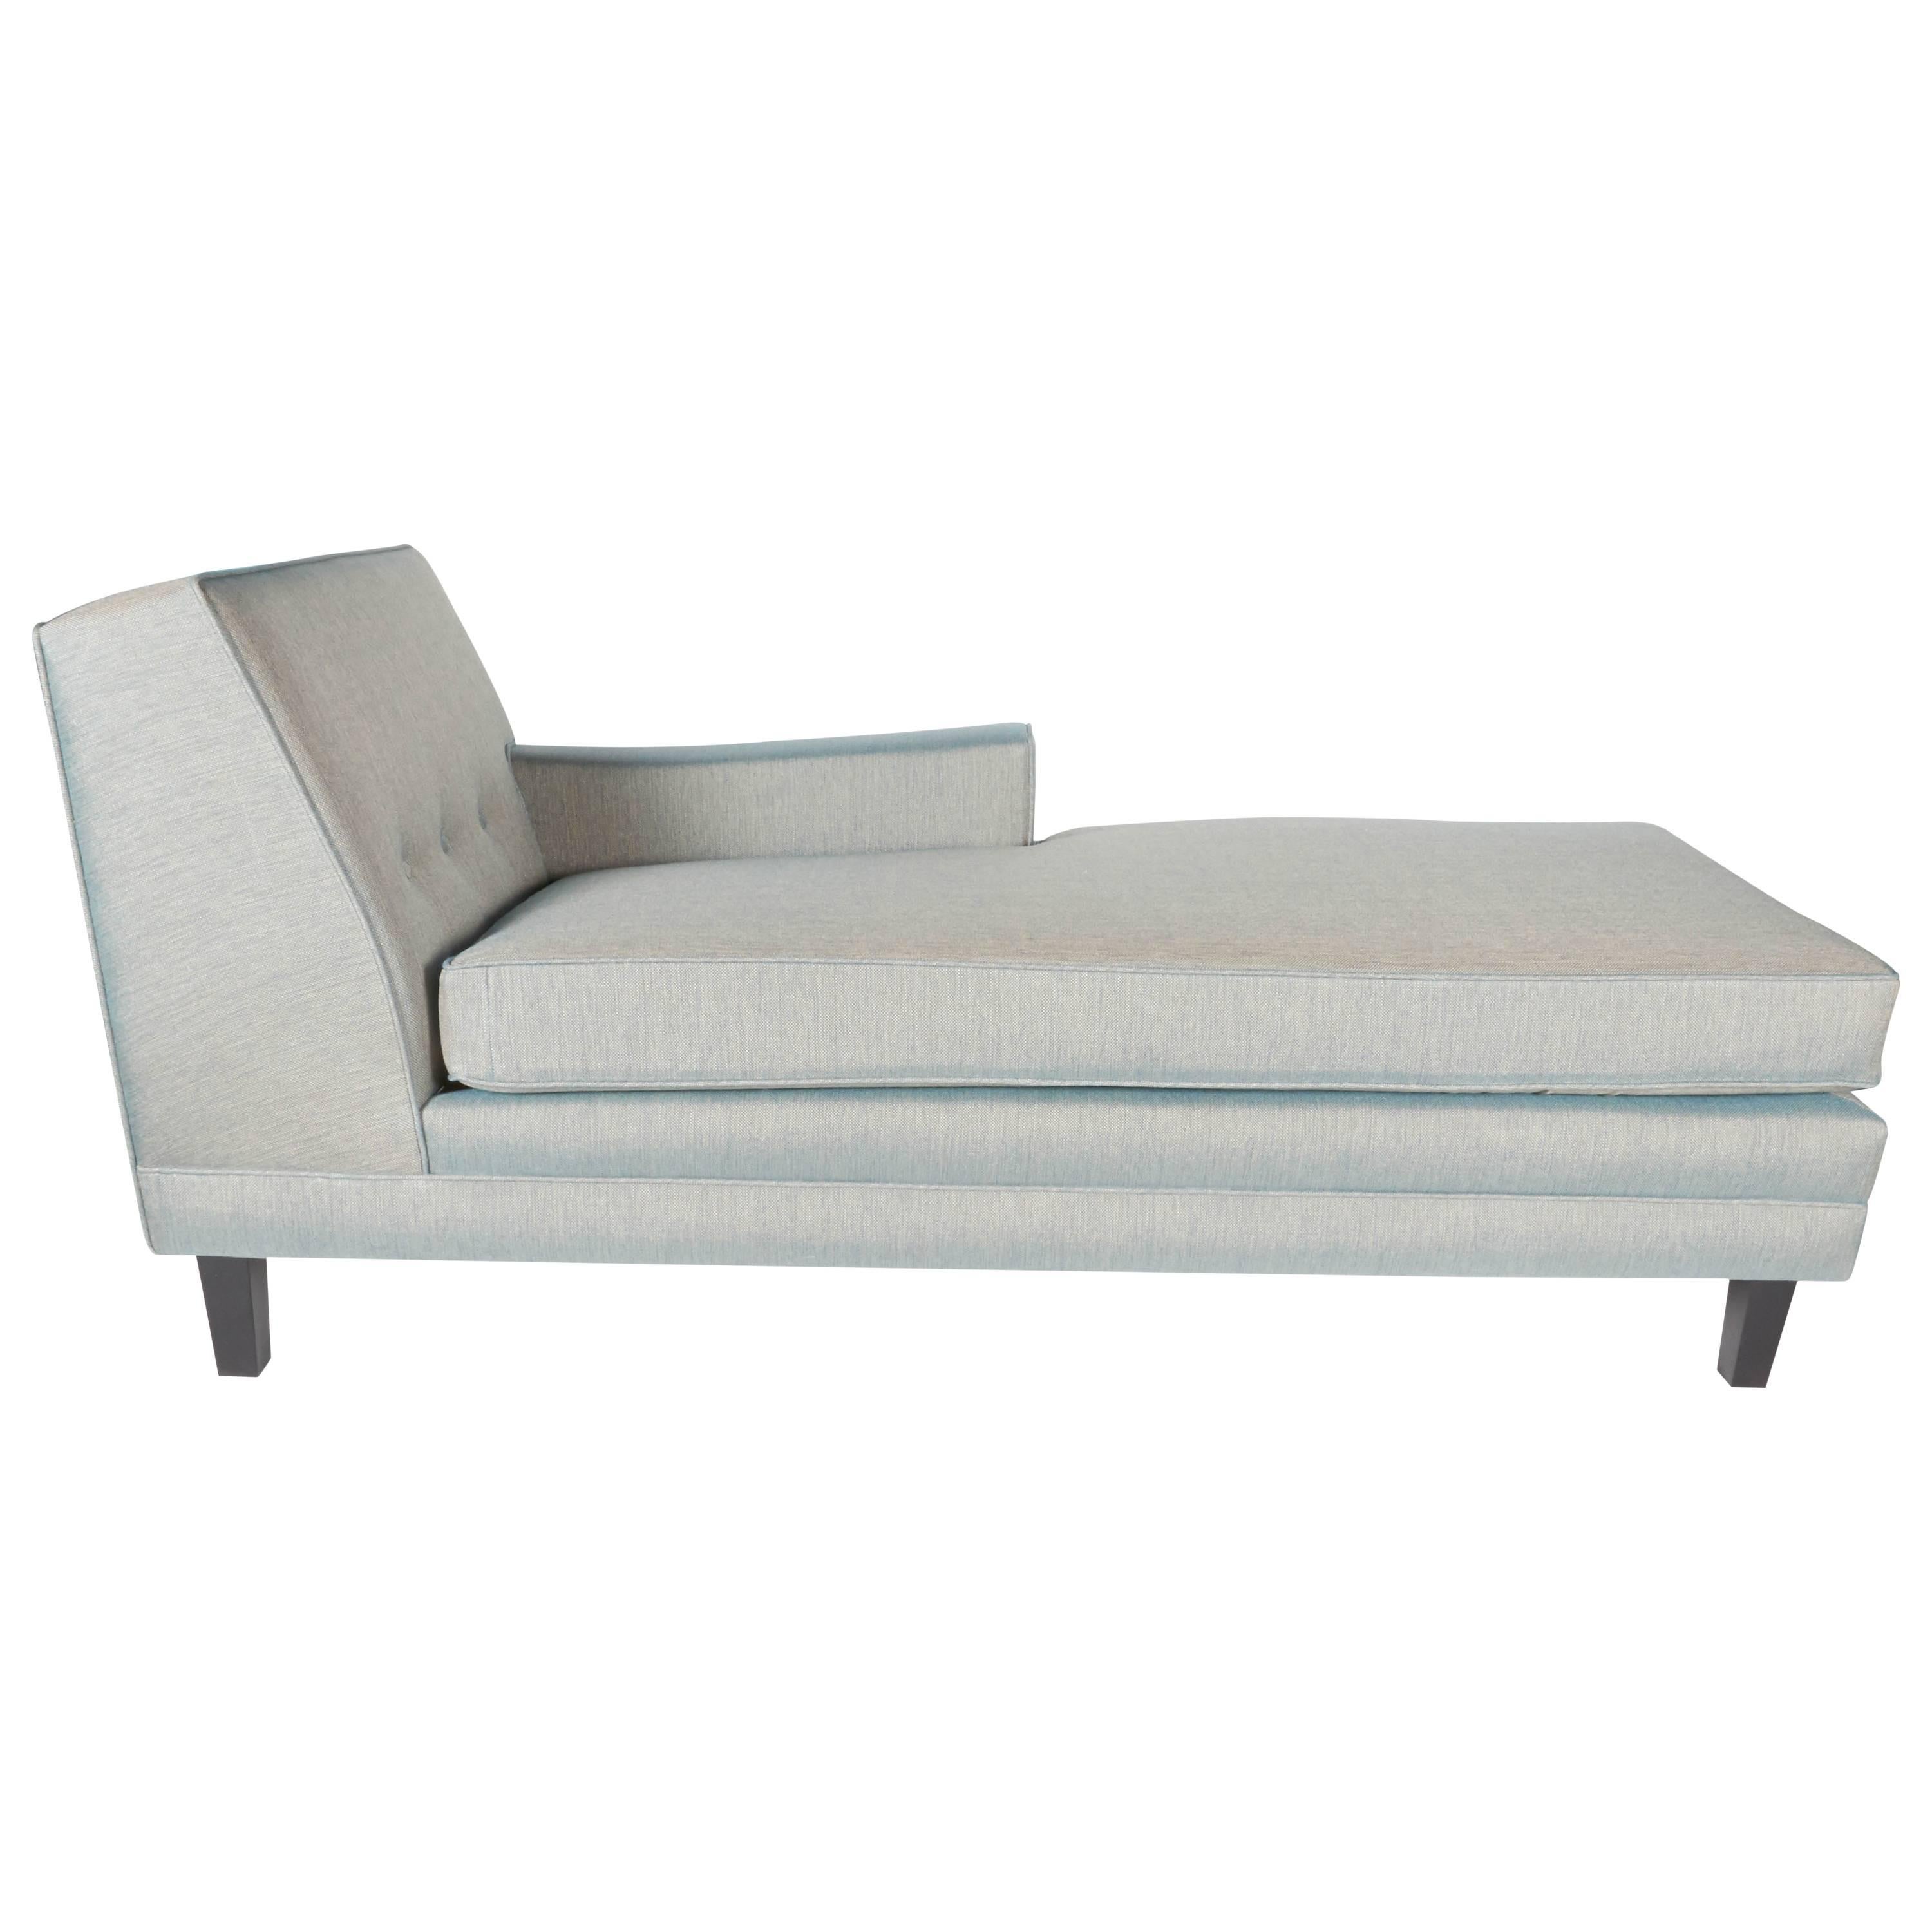 Mid-Century Modern Chaise Lounge with Low Profile Design